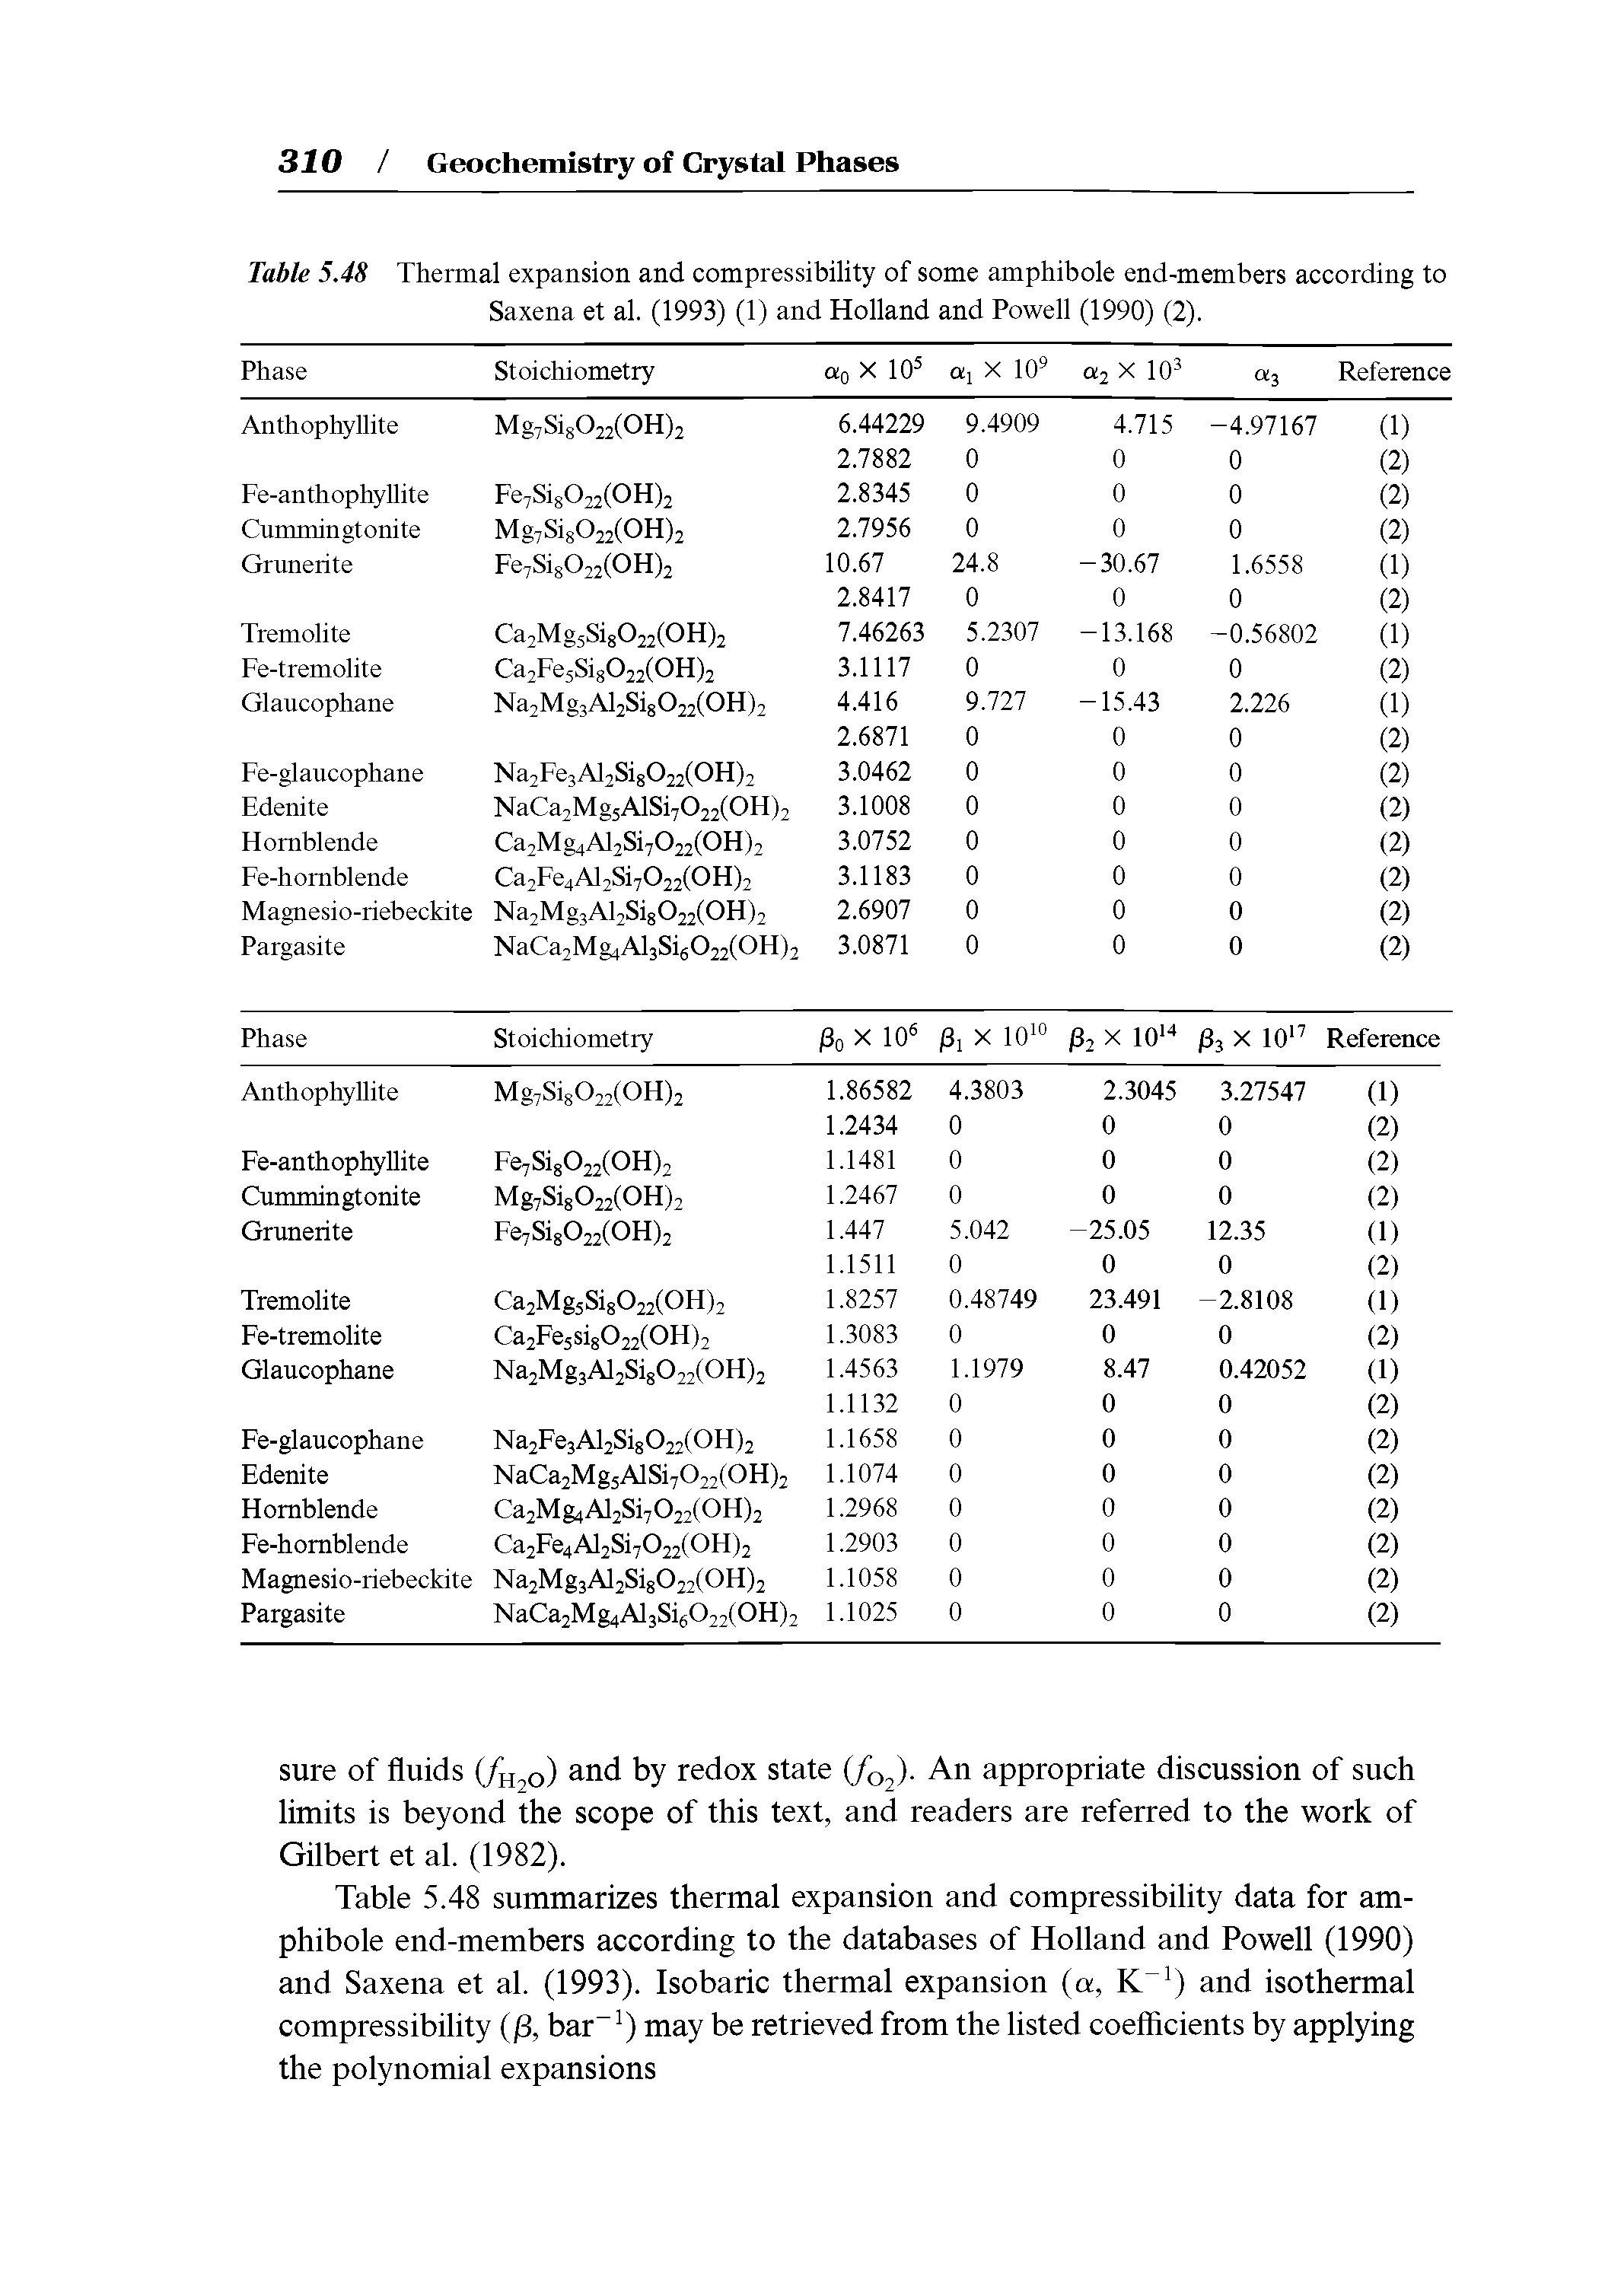 Table 5.48 Thermal expansion and compressibility of some amphibole end-members according to Saxena et al. (1993) (1) and Holland and Powell (1990) (2).